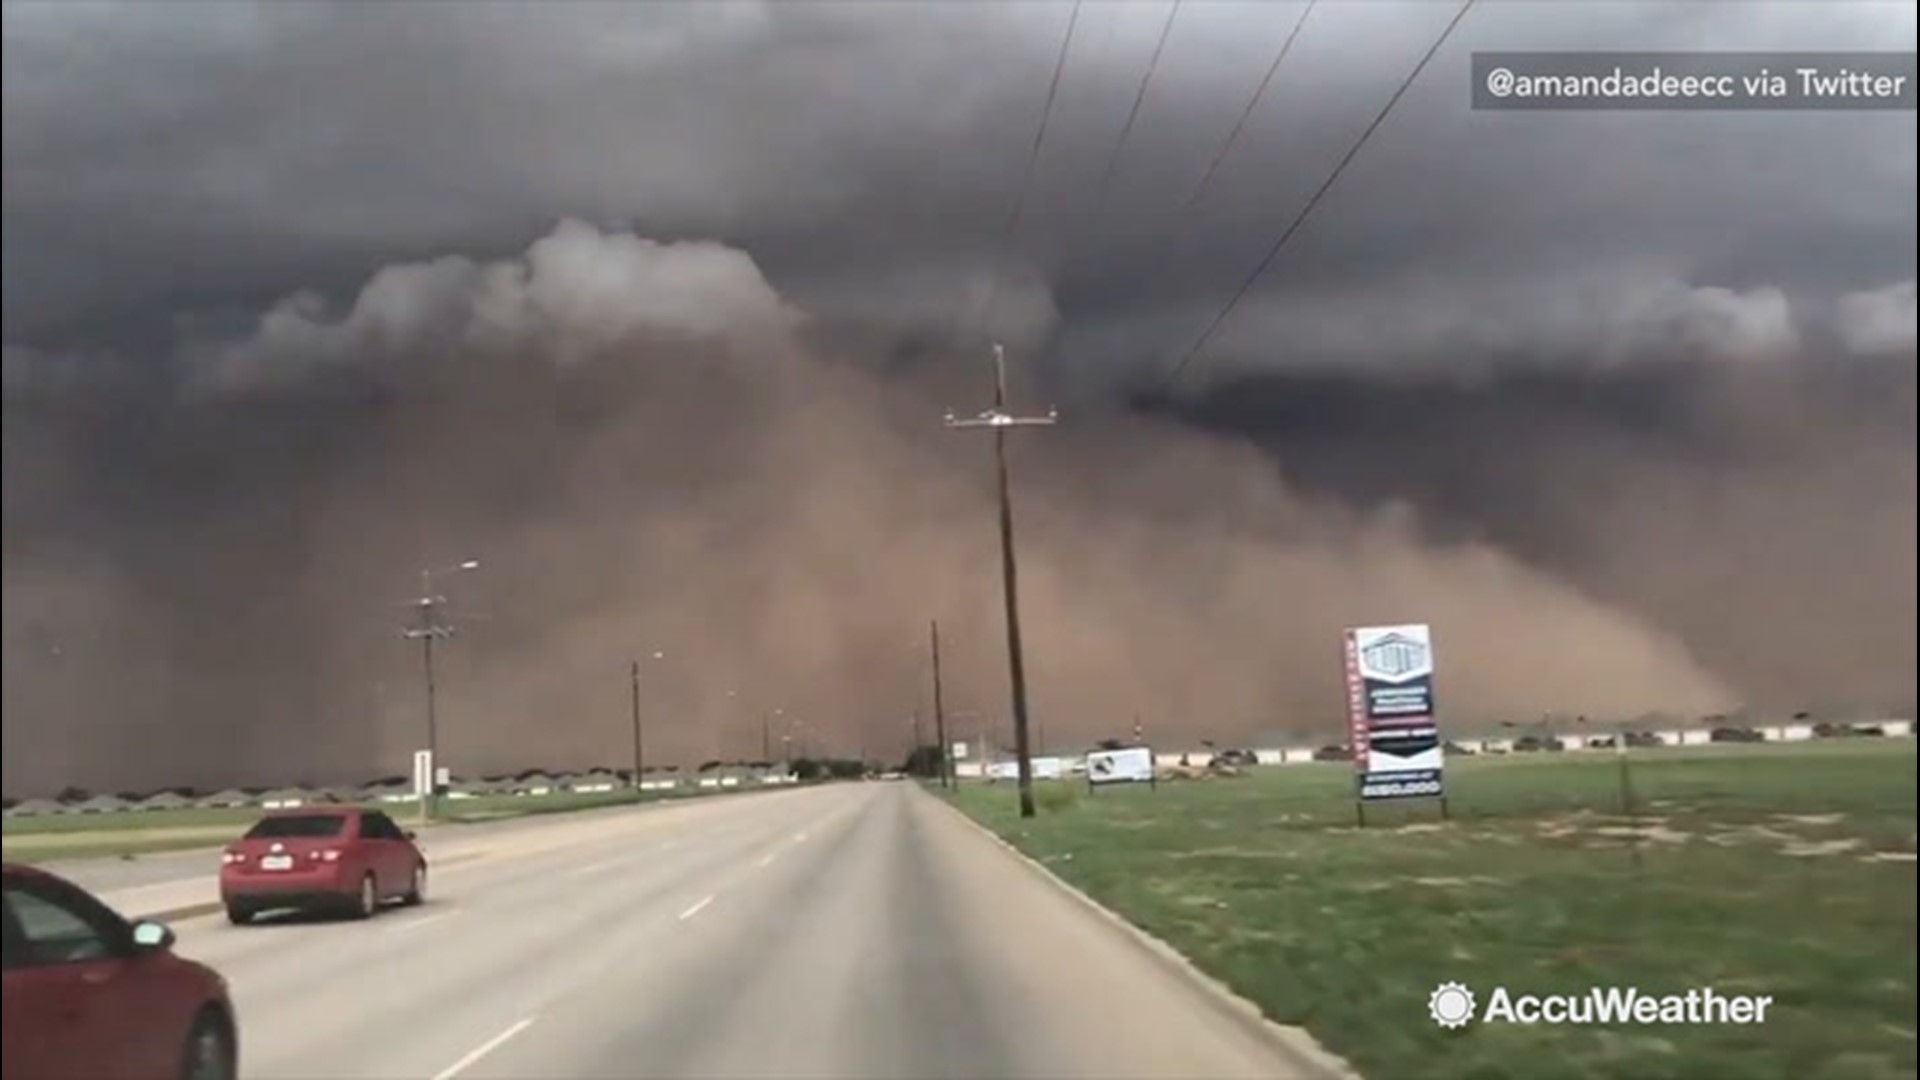 A massive wall of dirt, known as a haboob, raged through Lubbock, Texas, on June 5. The haboob packed winds powerful winds as it slung dirt through the area, making conditions outside unbearable.